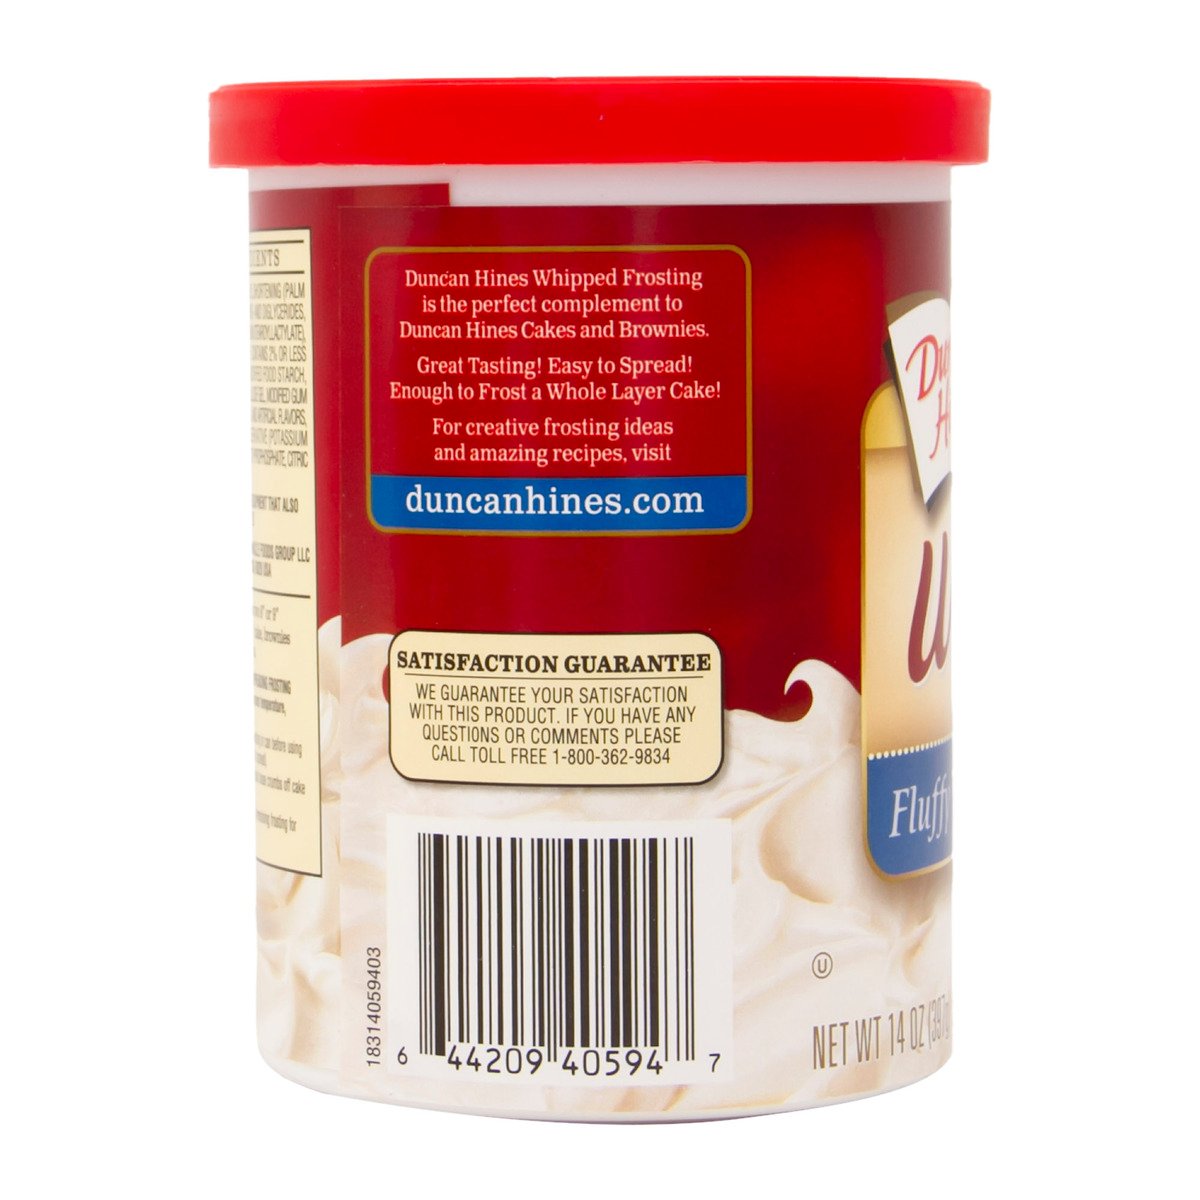 Duncan Hines Whipped Frosting Fluffy White 397 g